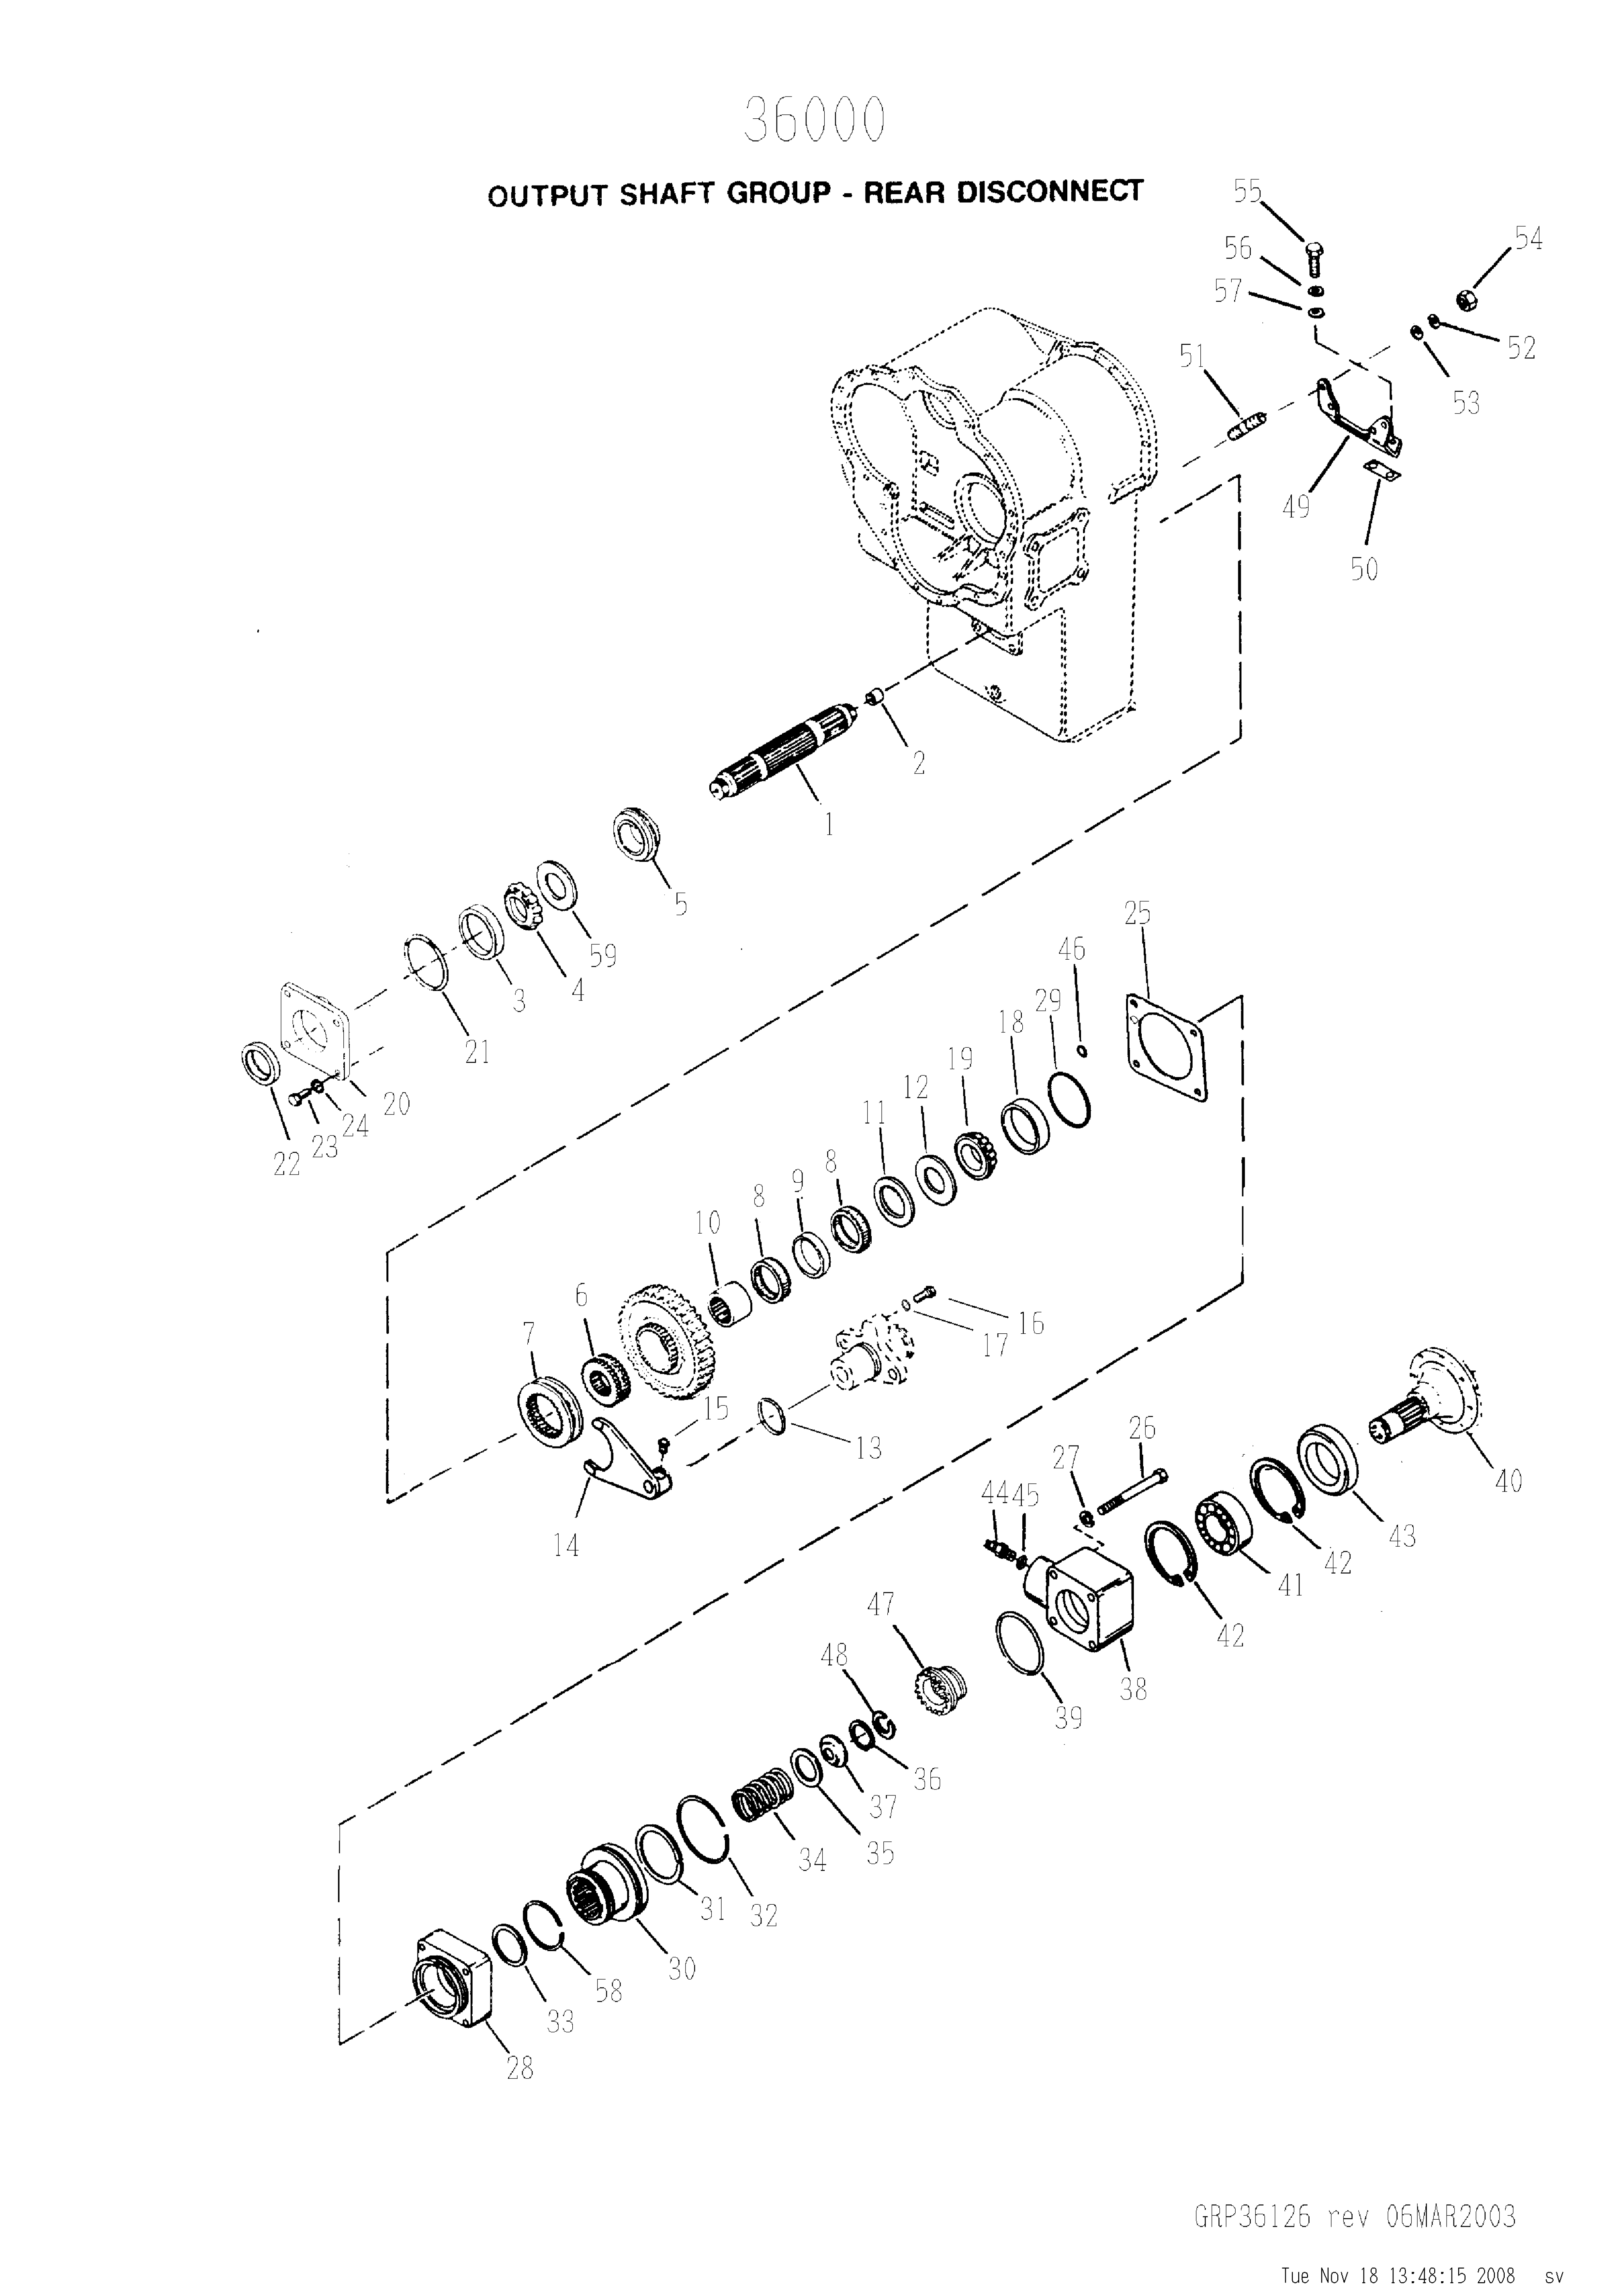 drawing for VALLEE CK214596 - BEARING (figure 3)